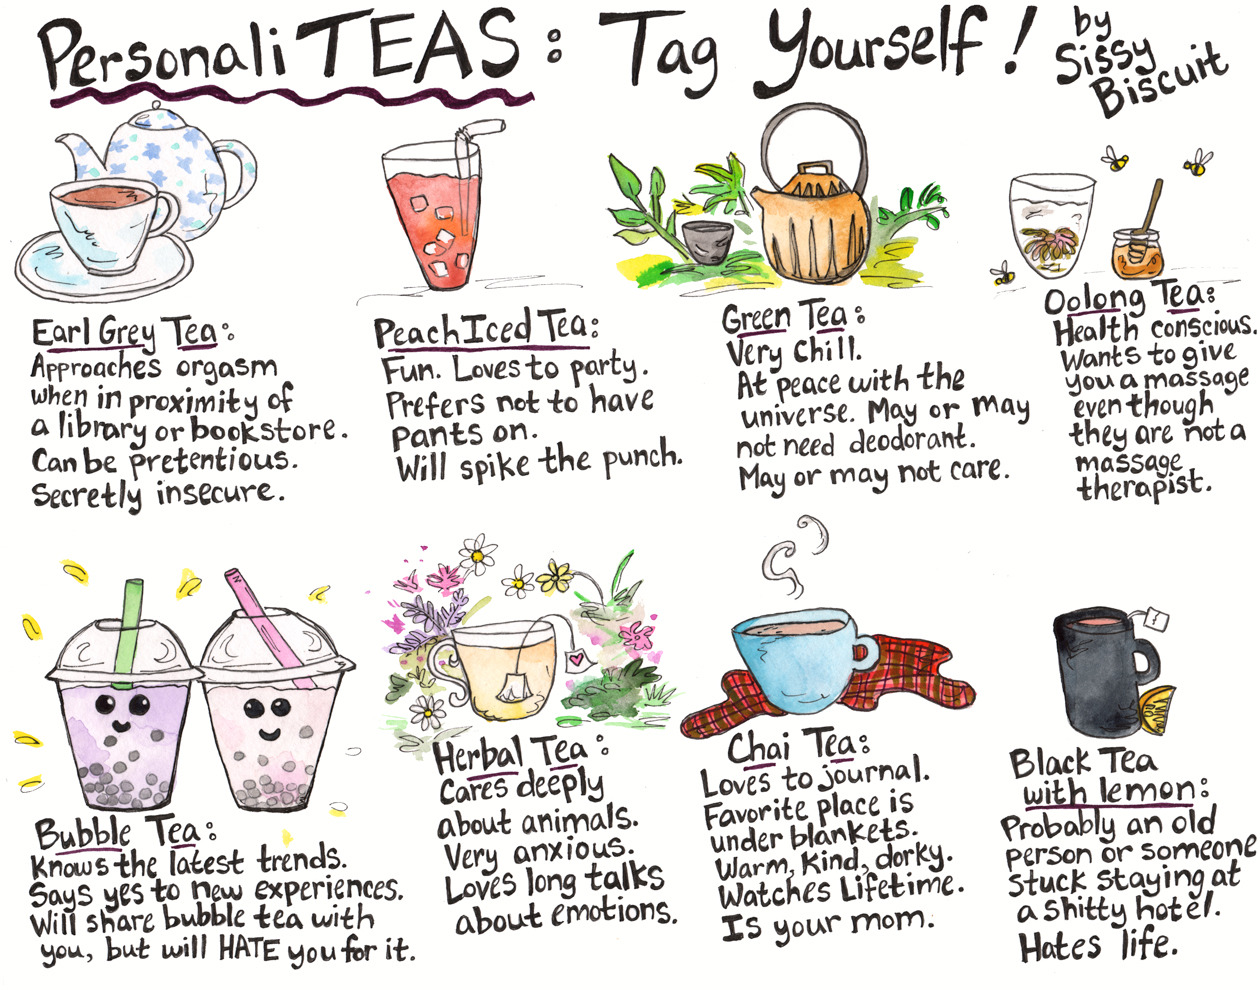 jeza-red:  Black tea with lemon is the only tea worth drinking you hippie trash 